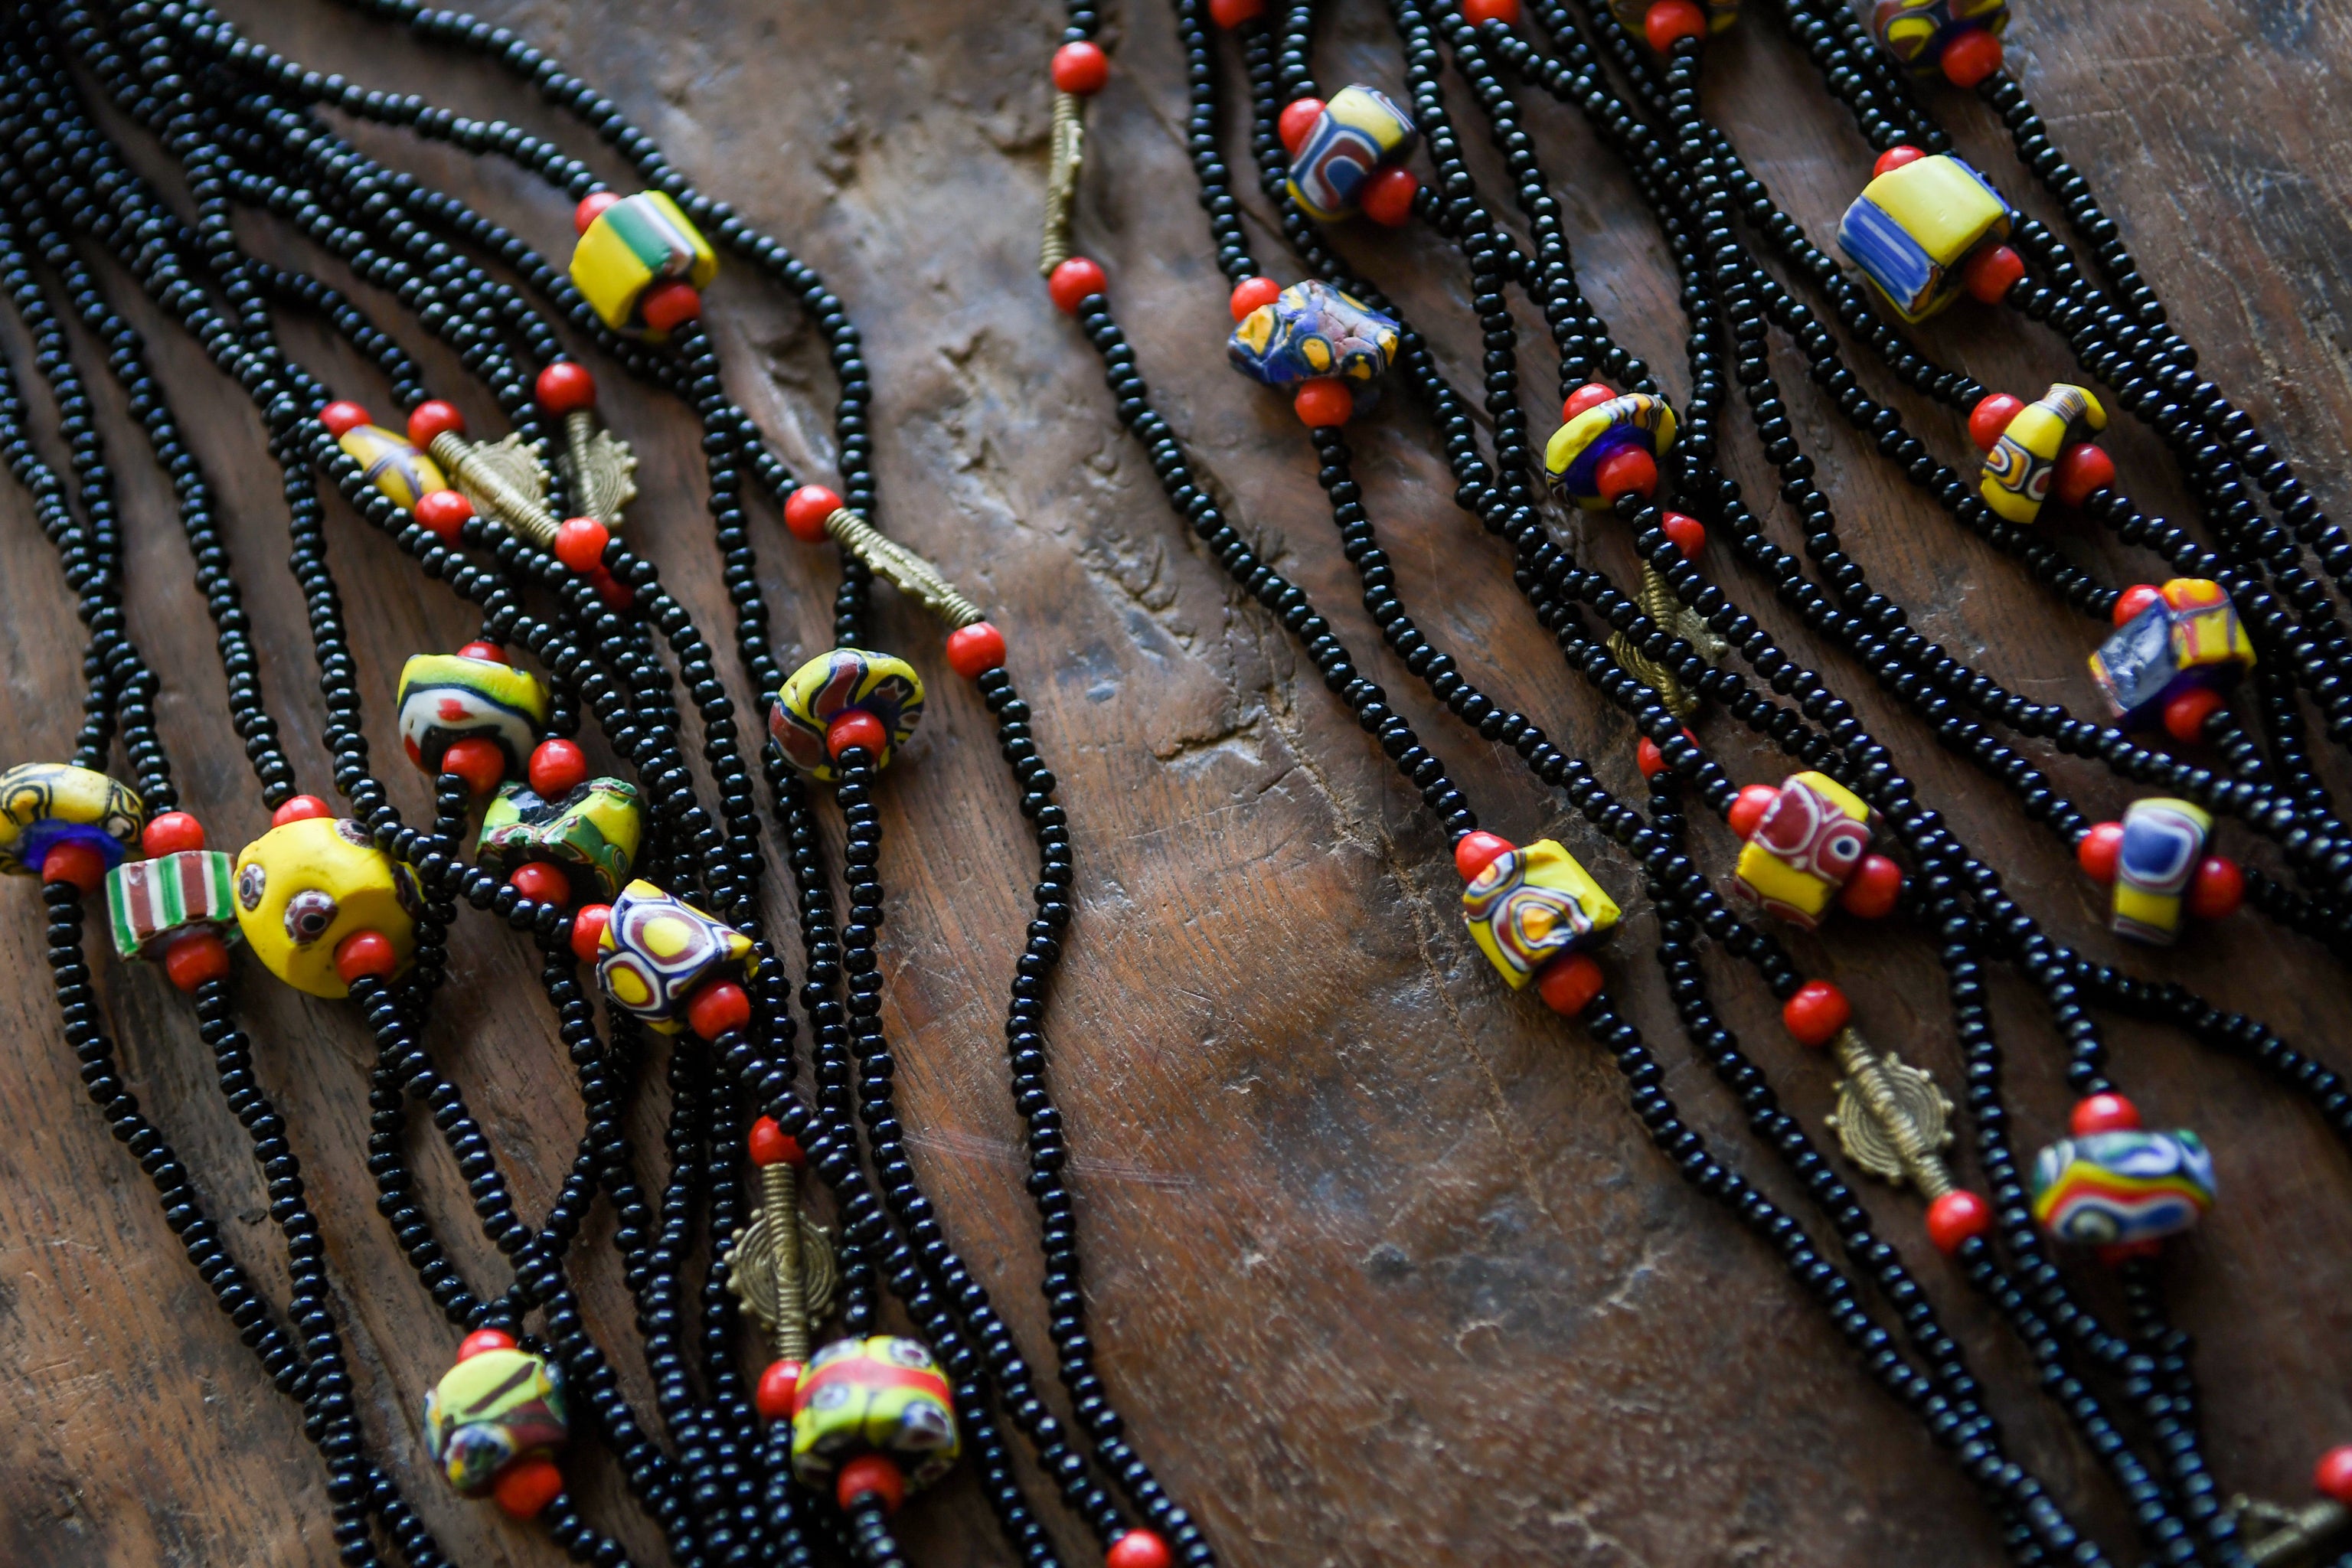 Tribal Necklaces - Handmade - African Art - Jewelry - Traditional - African Necklaces - Beaded - Collectible Necklaces - This Tribal Beaded, African Necklace is a stylish and unique way to express yourself. Crafted with mixed Venetian Millefiori Glass Trade Beads, this Tribal Necklace is sure to turn heads. Enhance any wardrobe with the eye-catching design of this piece. Length: 16 inches